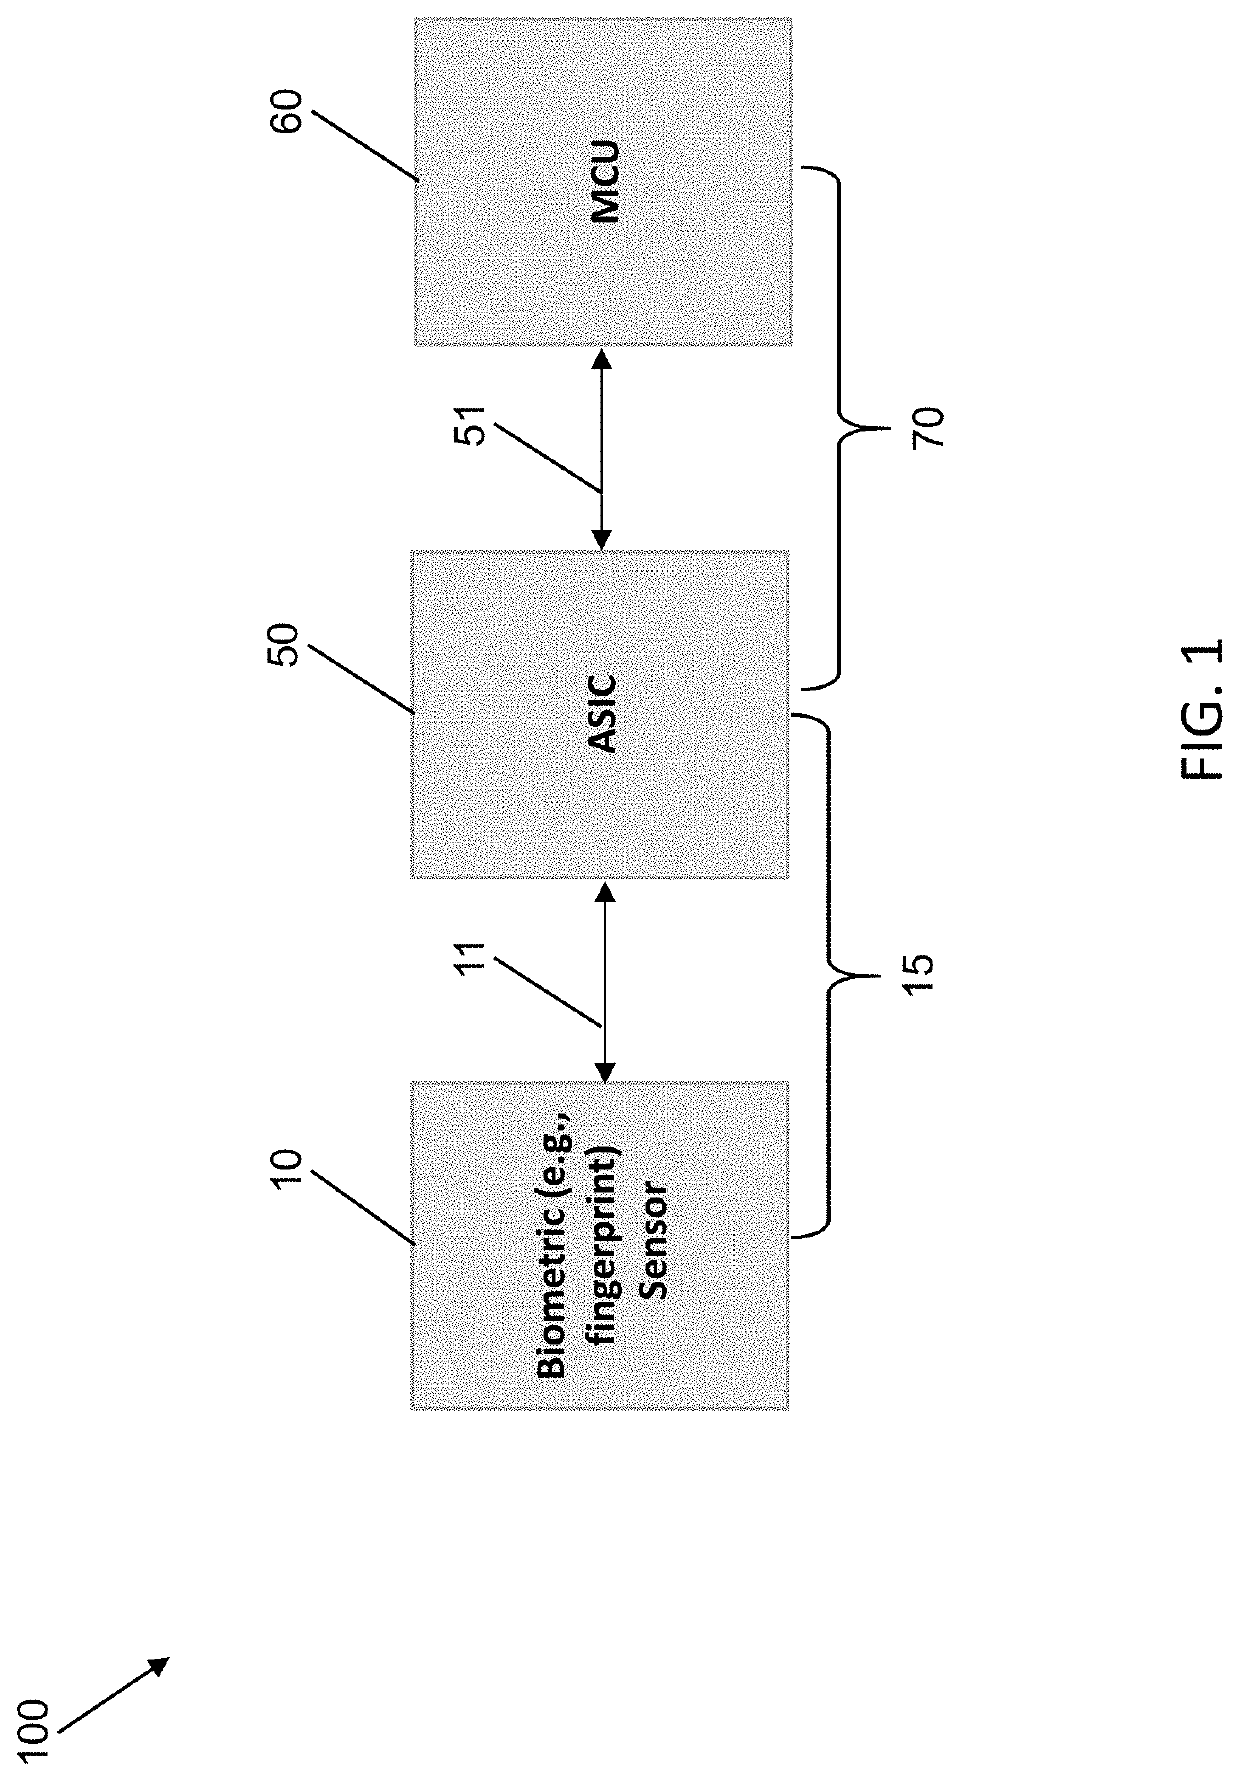 Sensor and system for biometric sensing having multi-segment architecture, and methods of using the same